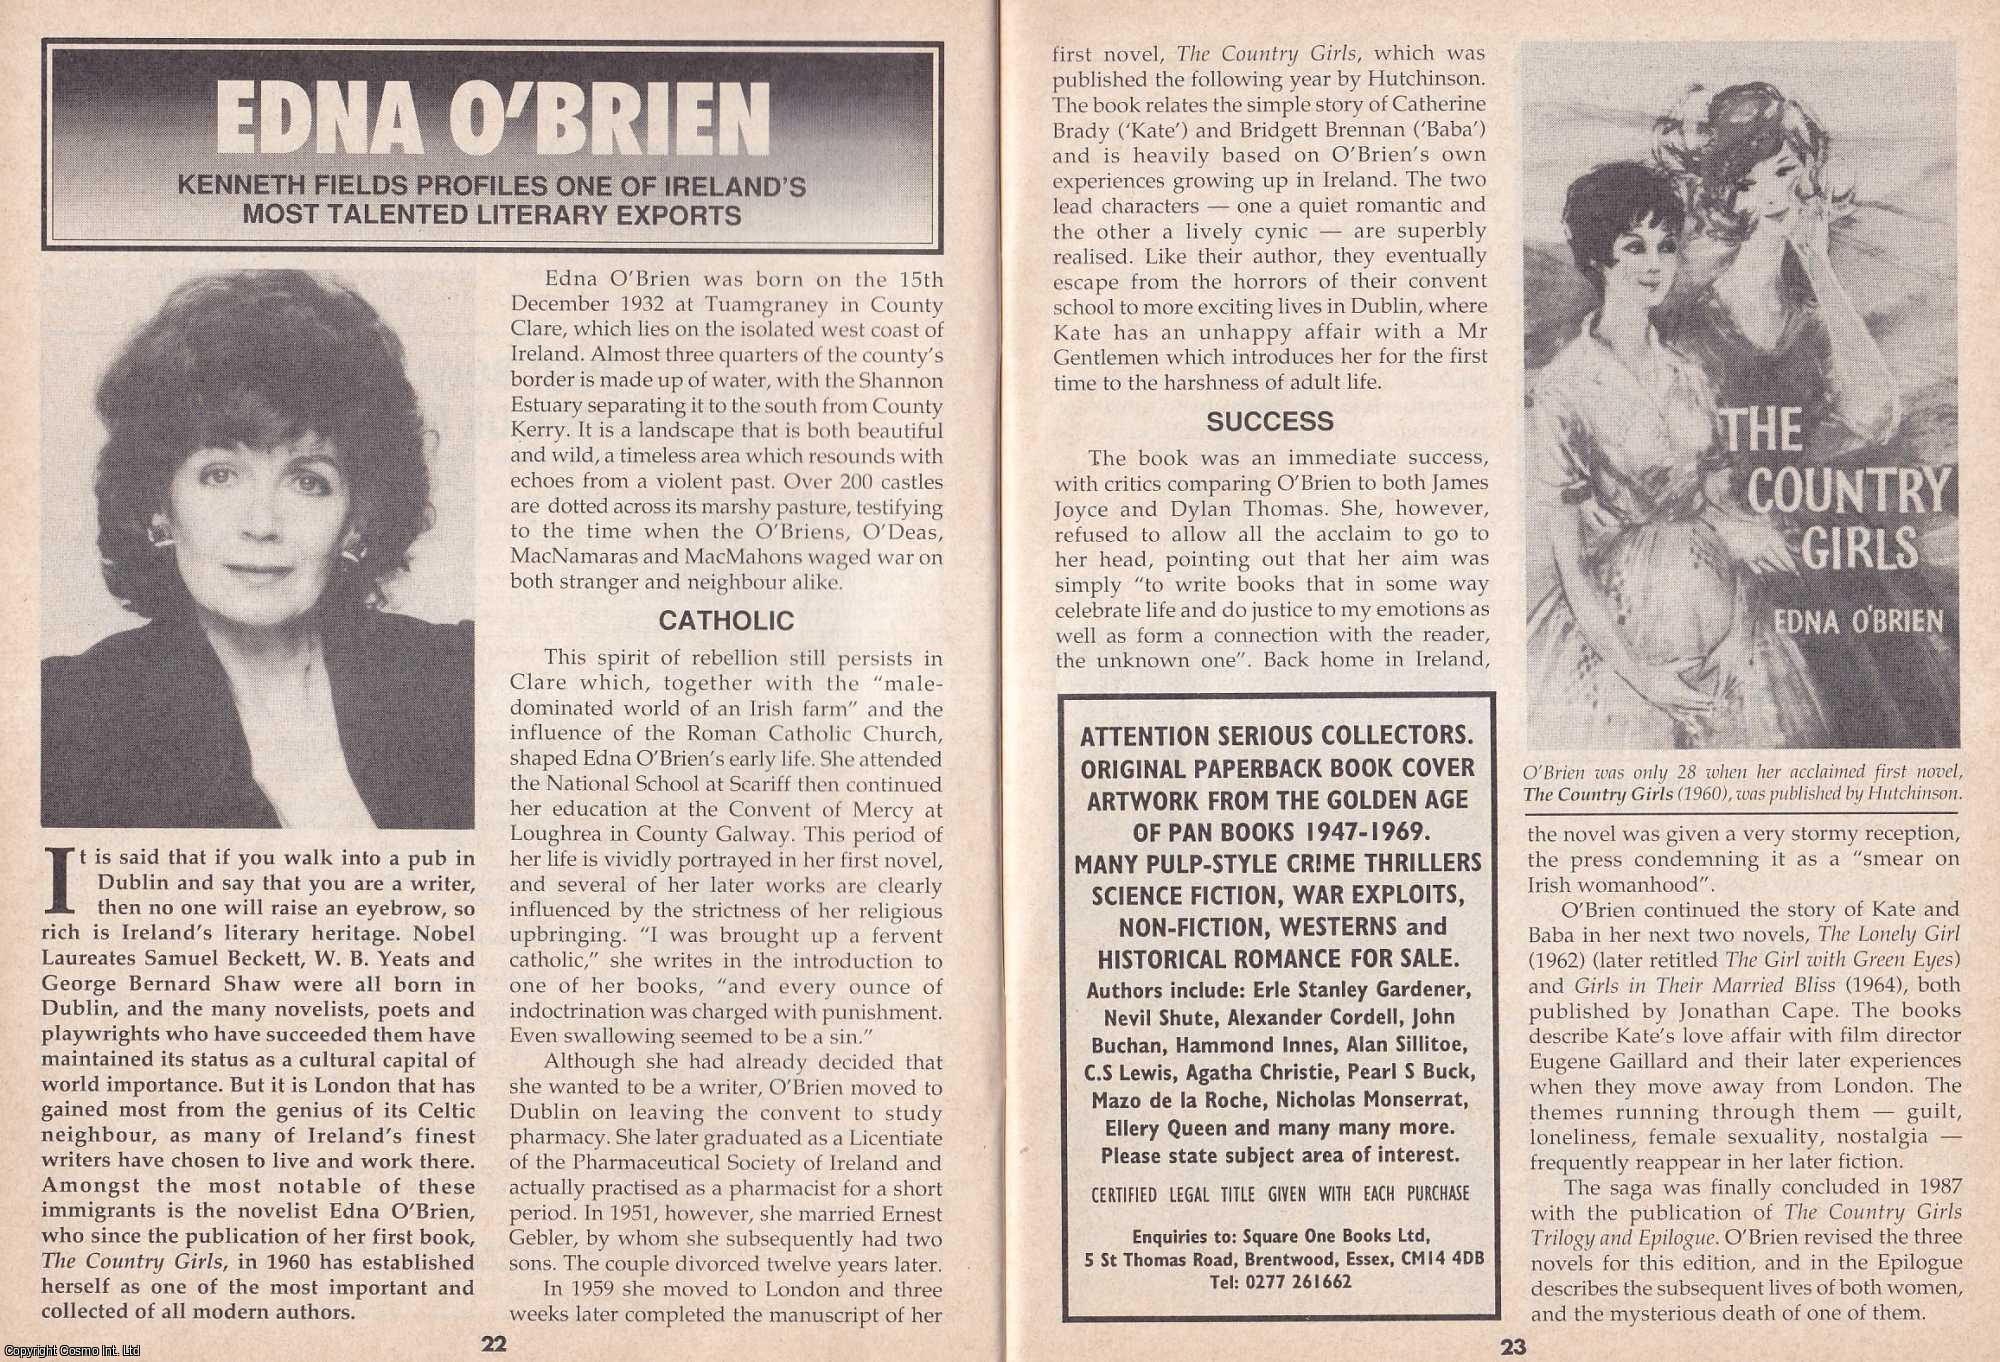 Kenneth Fields - Edna O'Brien : Irish Novelist, memoirist, biographer, playwright, poet and short story writer. This is an original article separated from an issue of The Book & Magazine Collector publication, 1992.